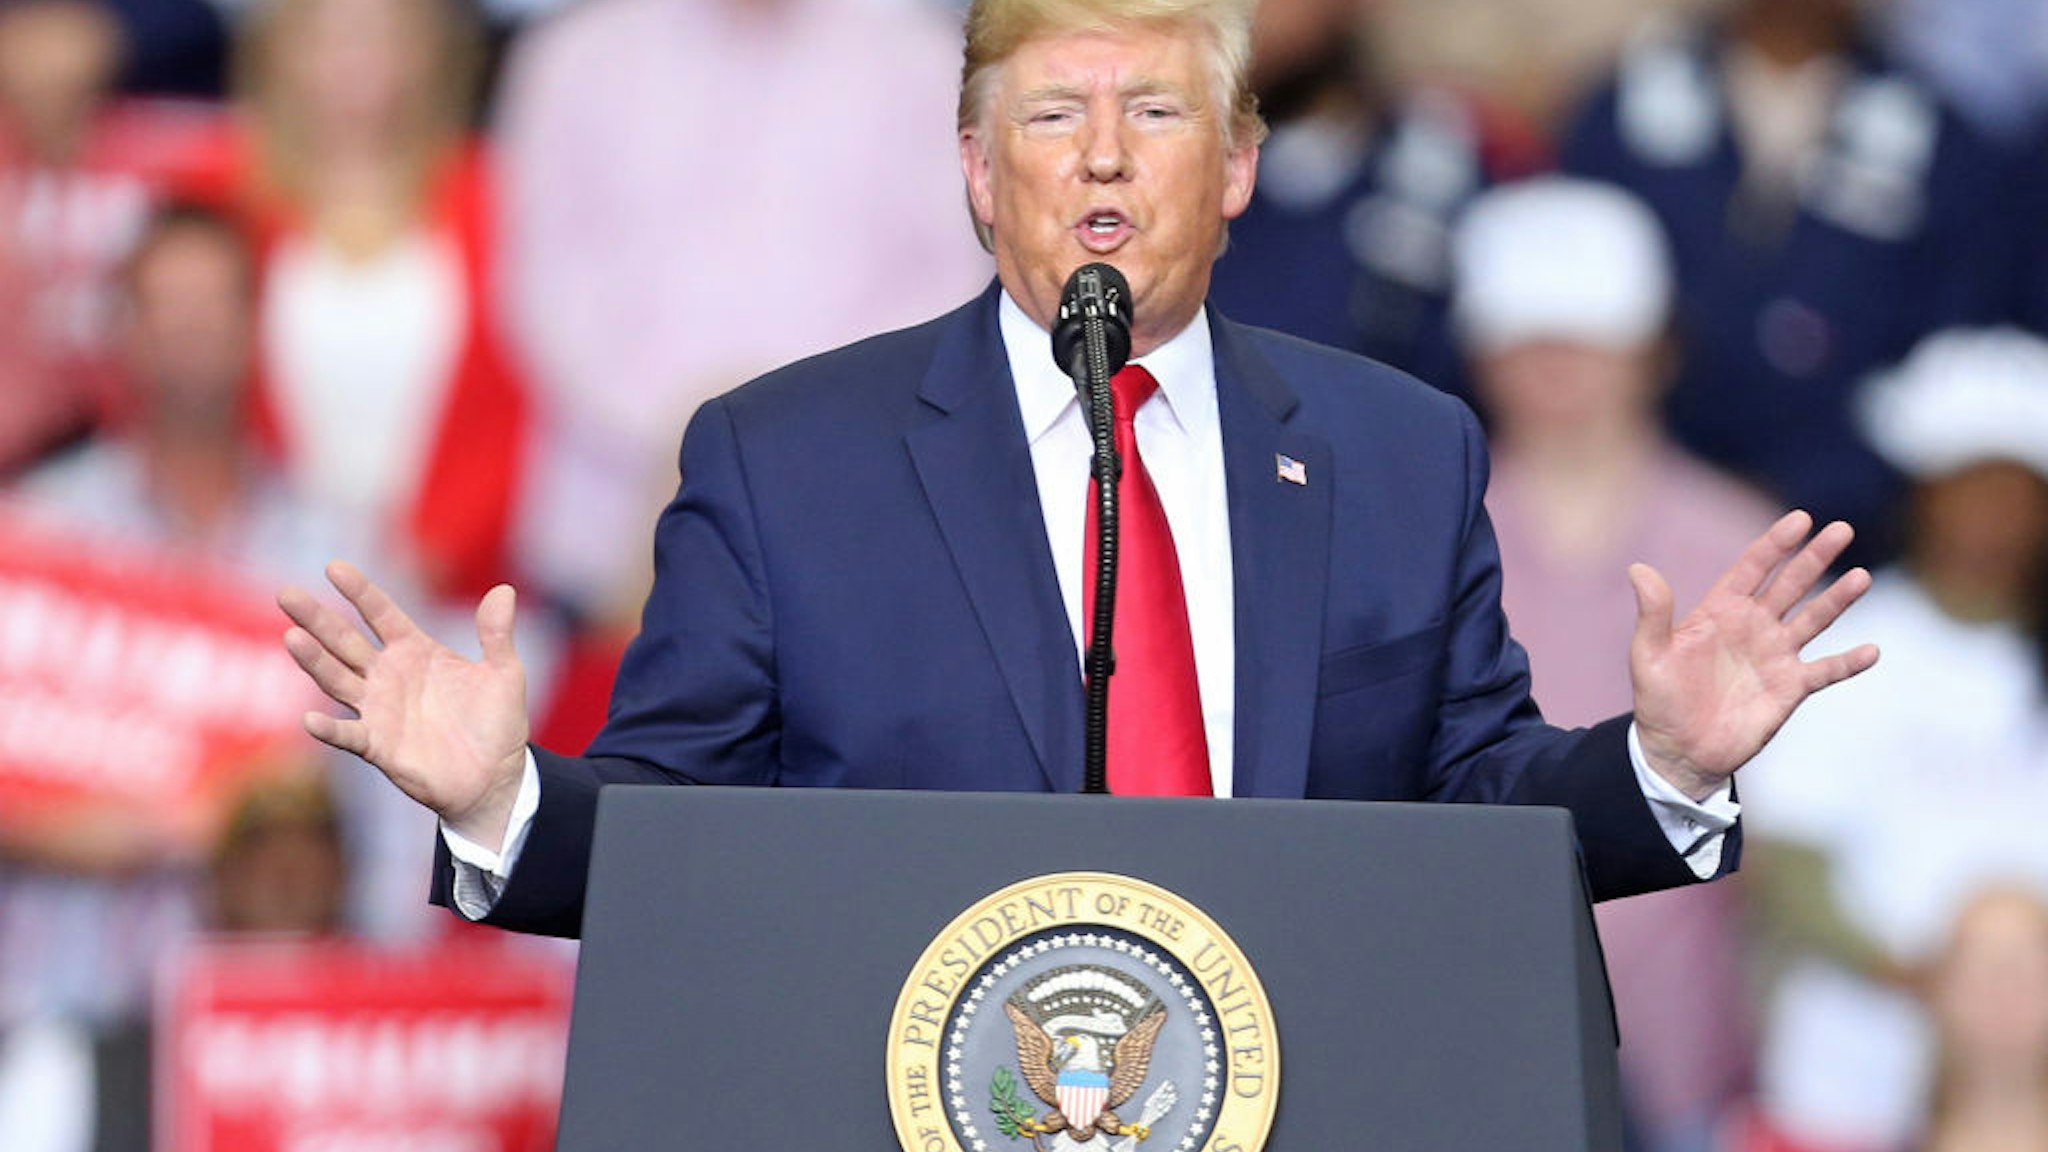 U.S. President Donald Trump speaks during a "Keep America Great" rally at the Monroe Civic Center on November 06, 2019 in Monroe, Louisiana. President Trump headlined the rally to support Louisiana Republican gubernatorial candidate Eddie Rispone, who is looking to unseat incumbent Democratic Gov. John Bel Edwards.